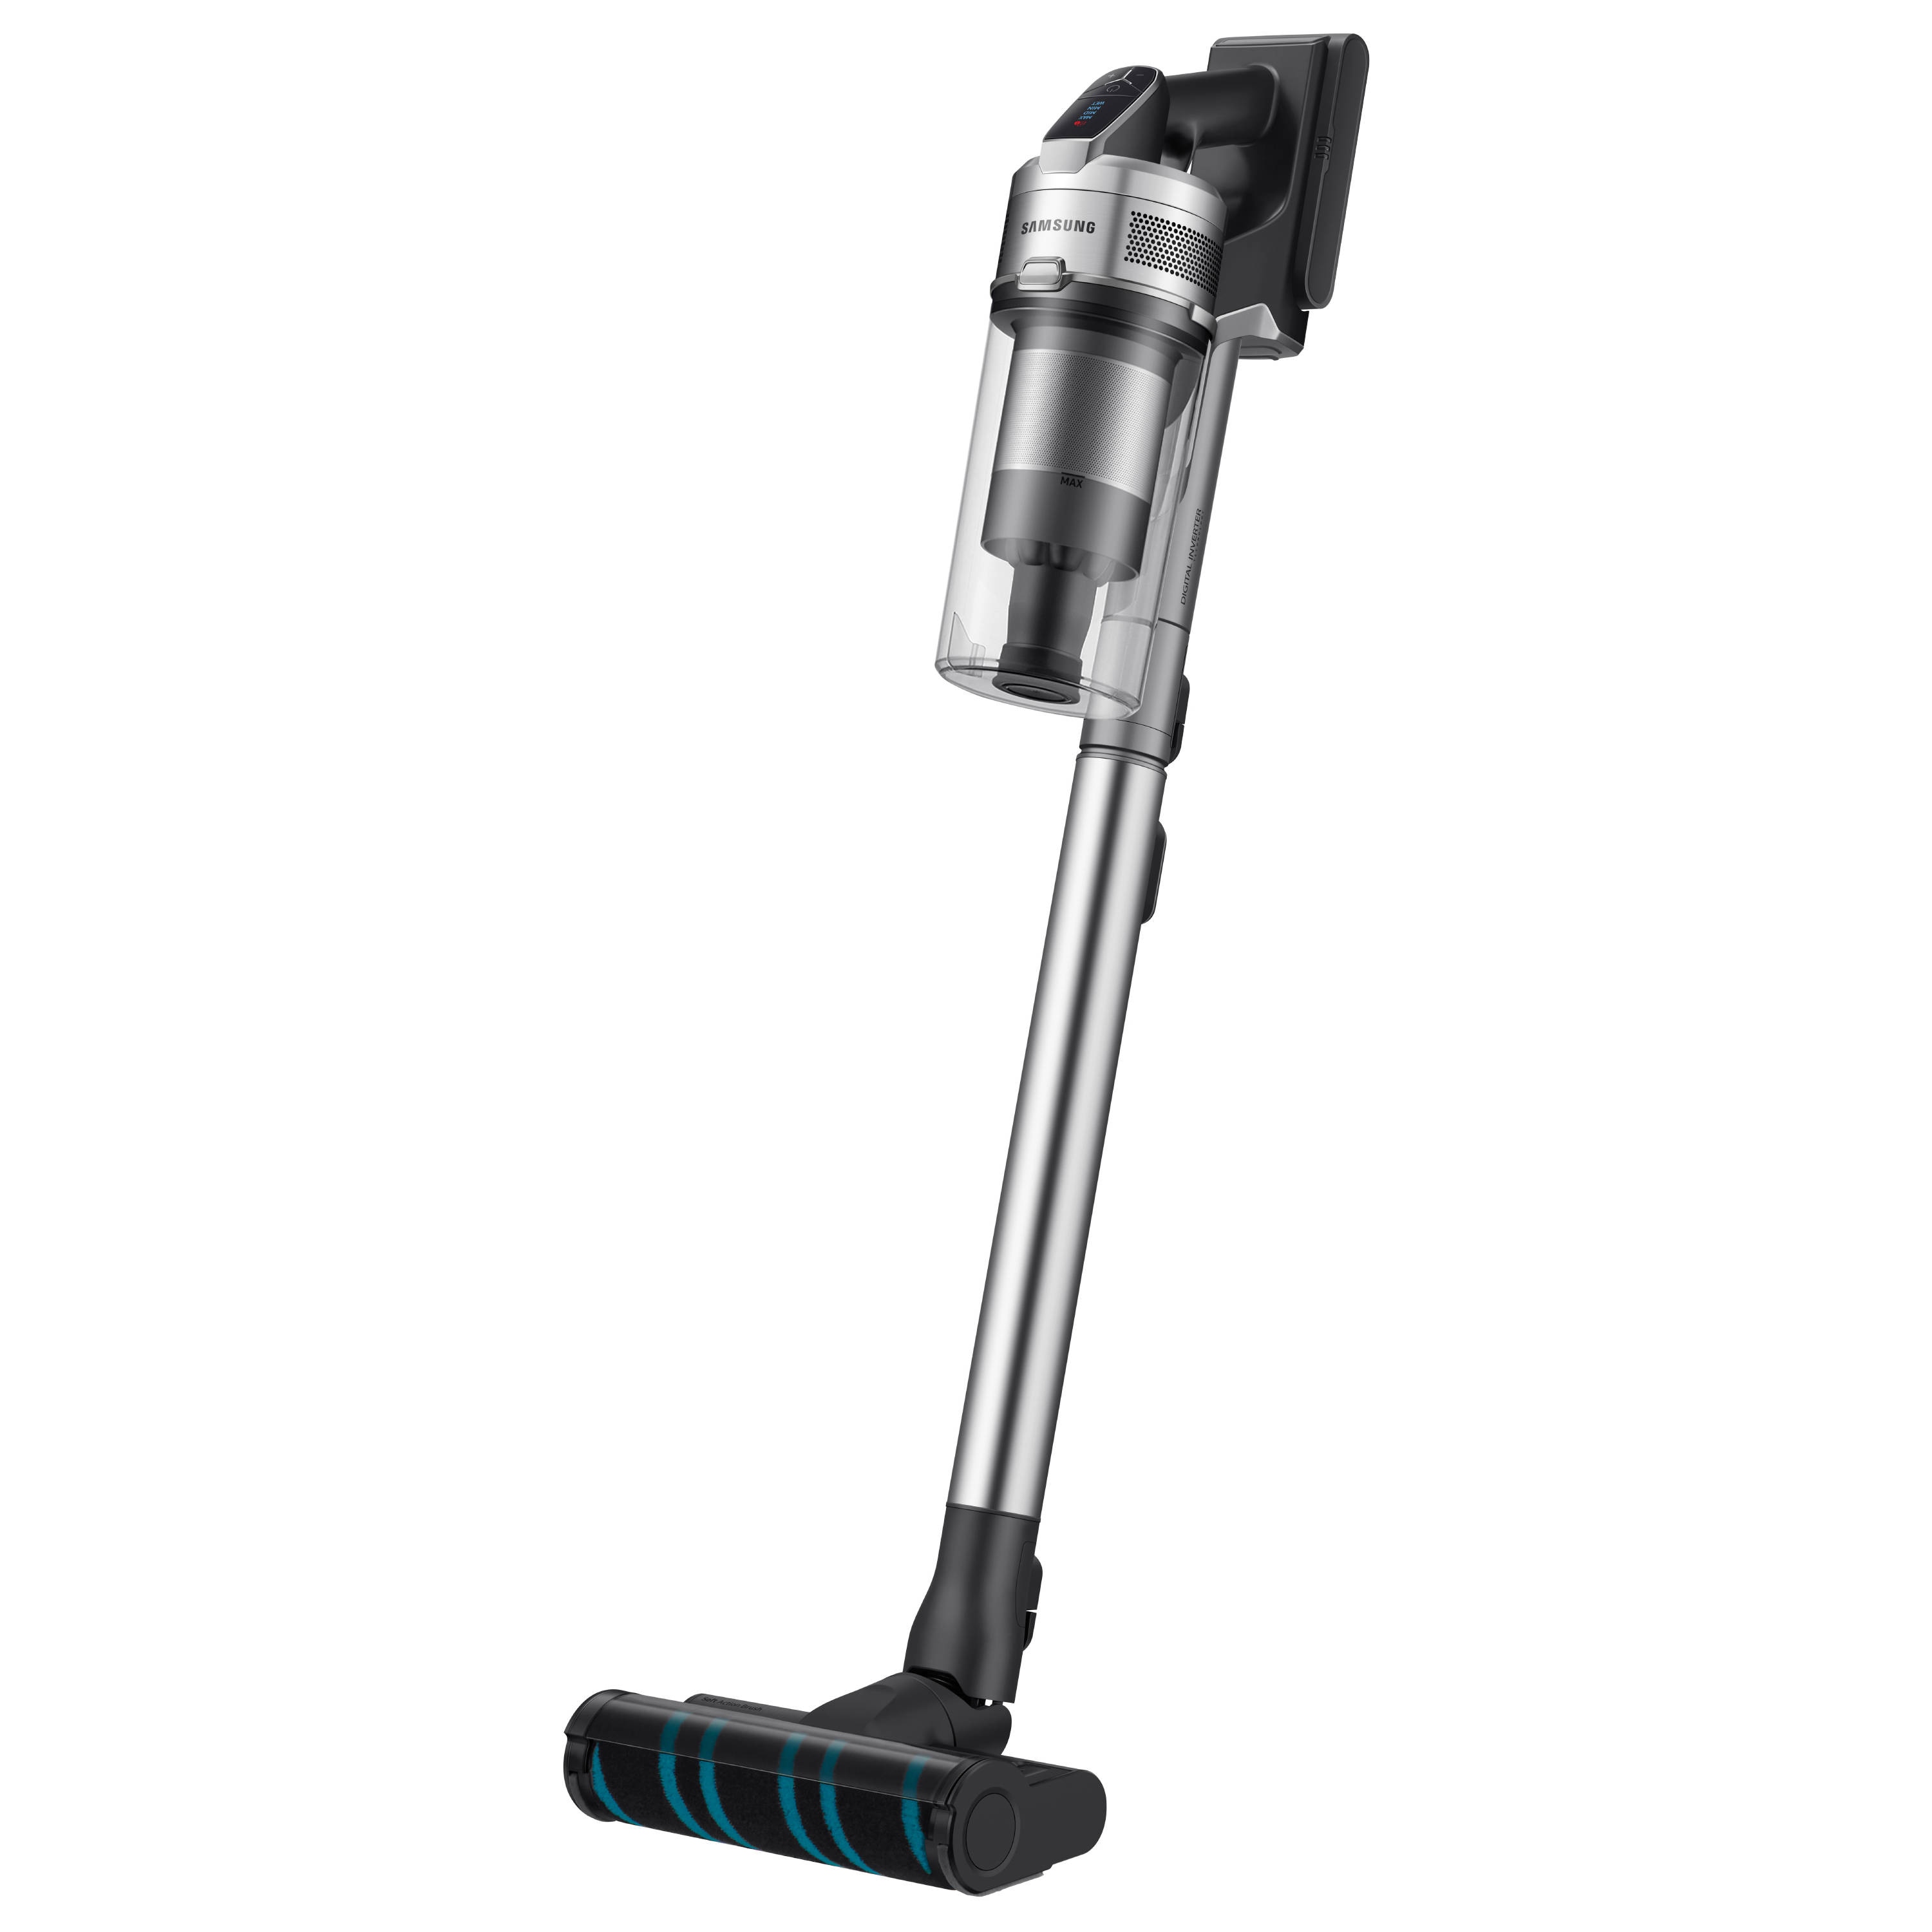 Samsung Jet 90 and (Convertible Bundle department To Vacuum Stick Pet at Cordless Stick 21.9 Vacuums Station the Volt Clean Handheld) in